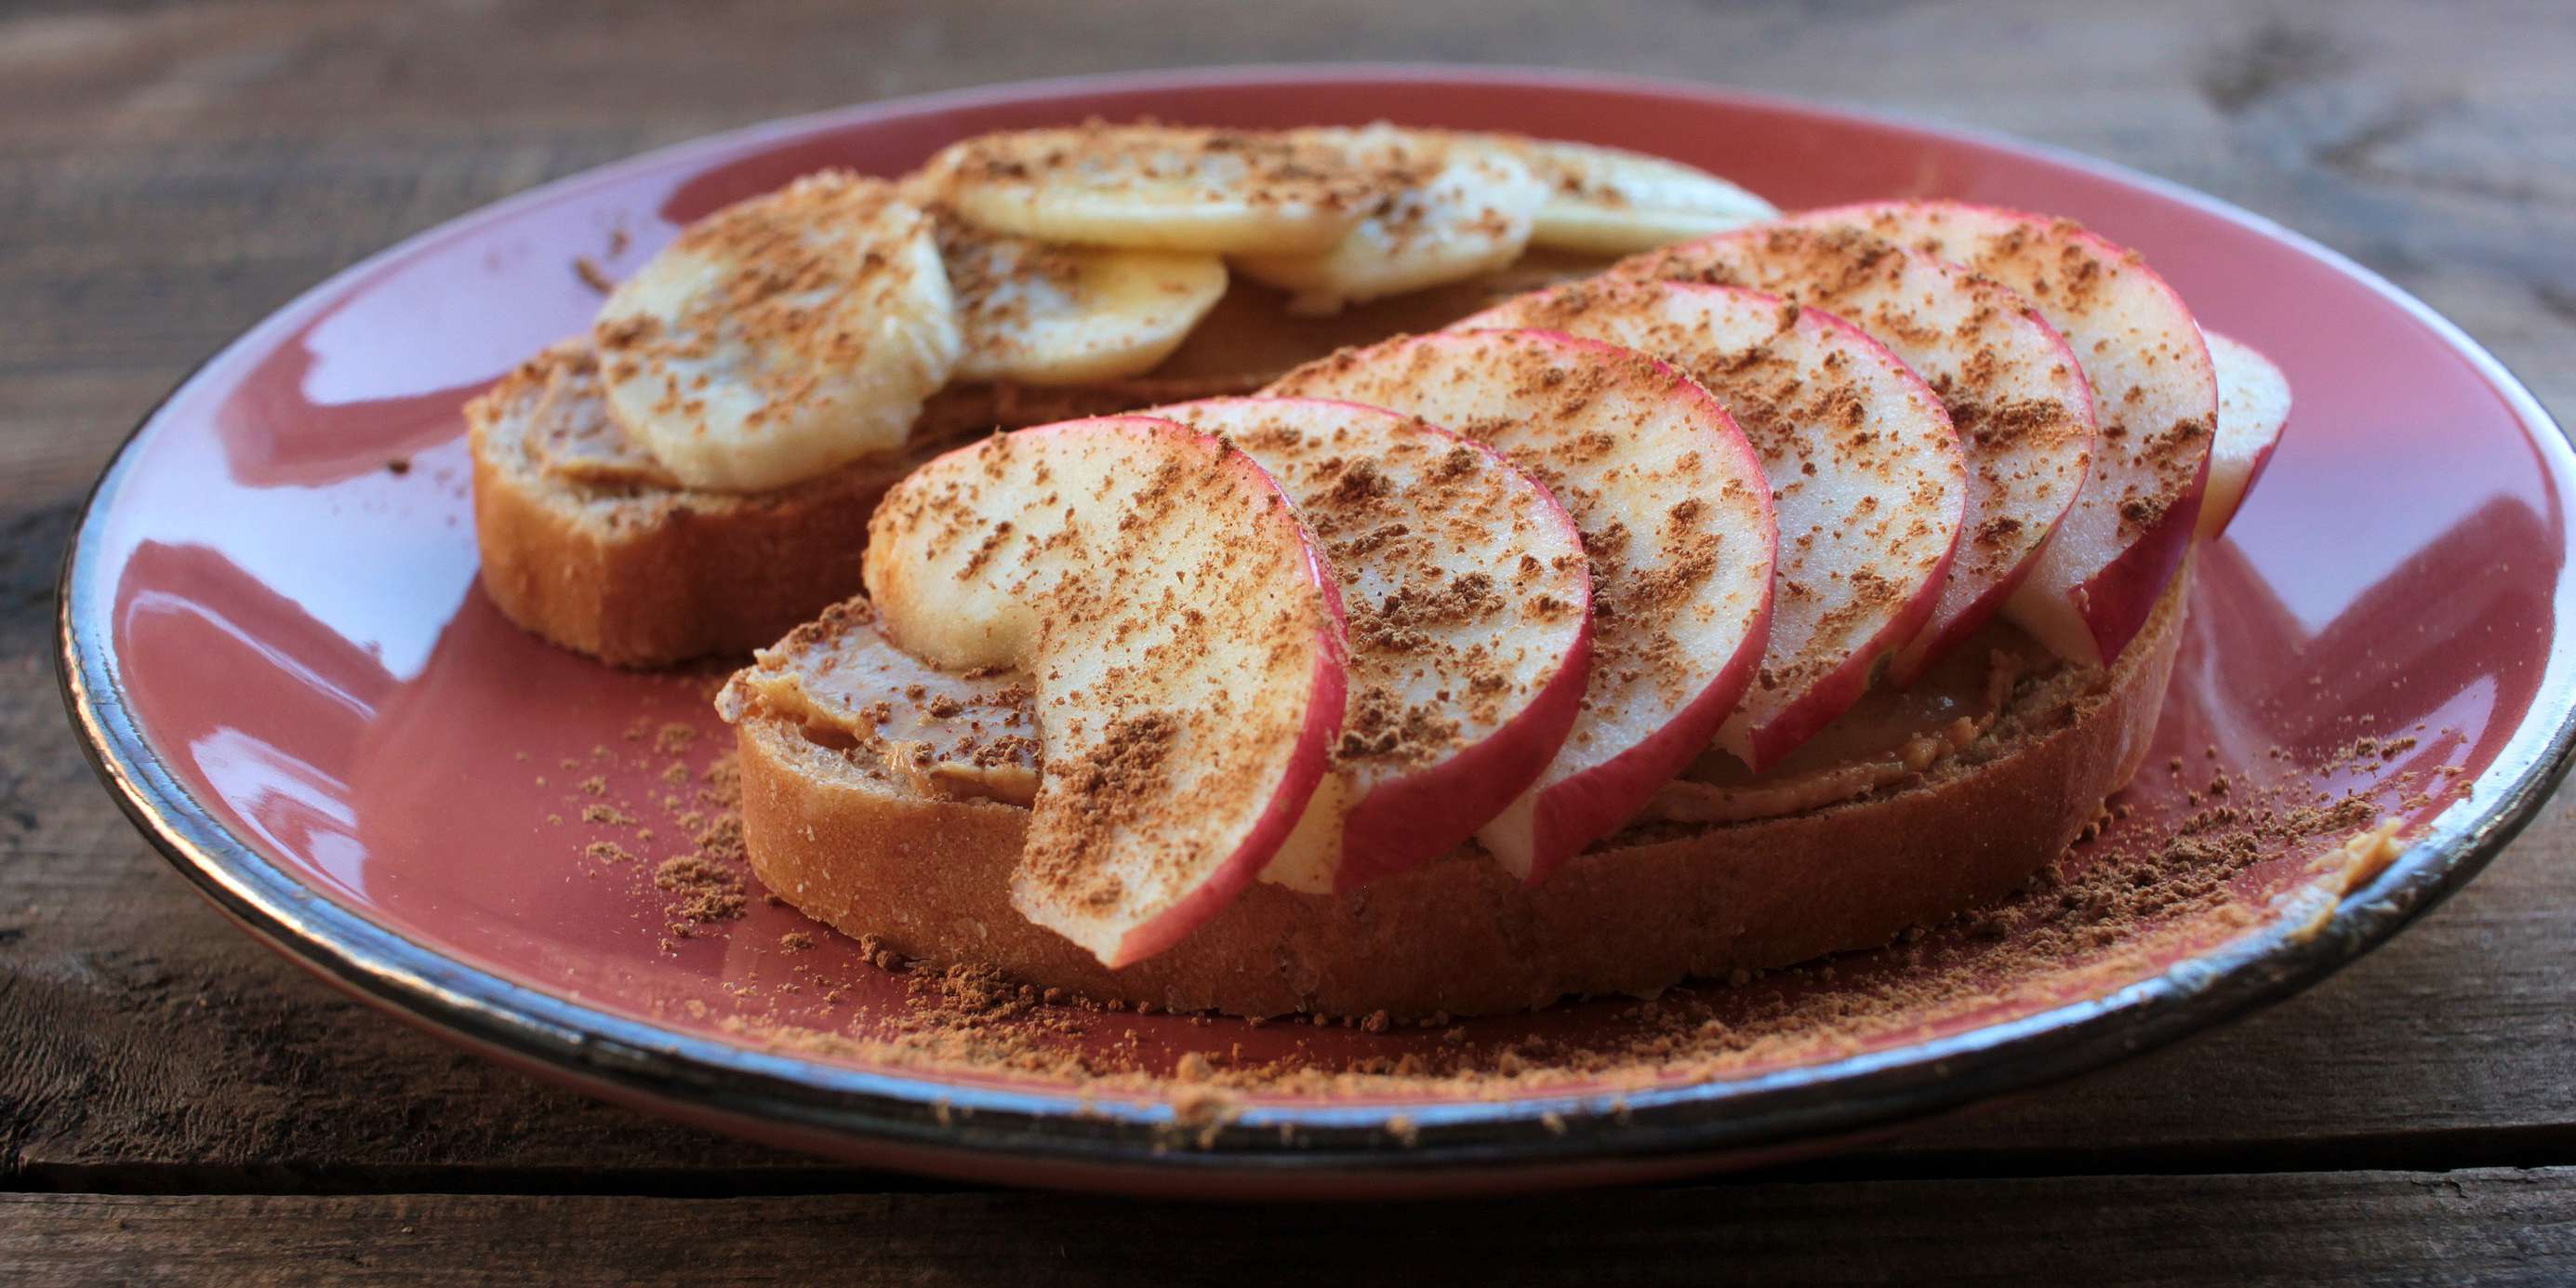 Toast with Almond Butter and Apple Slices